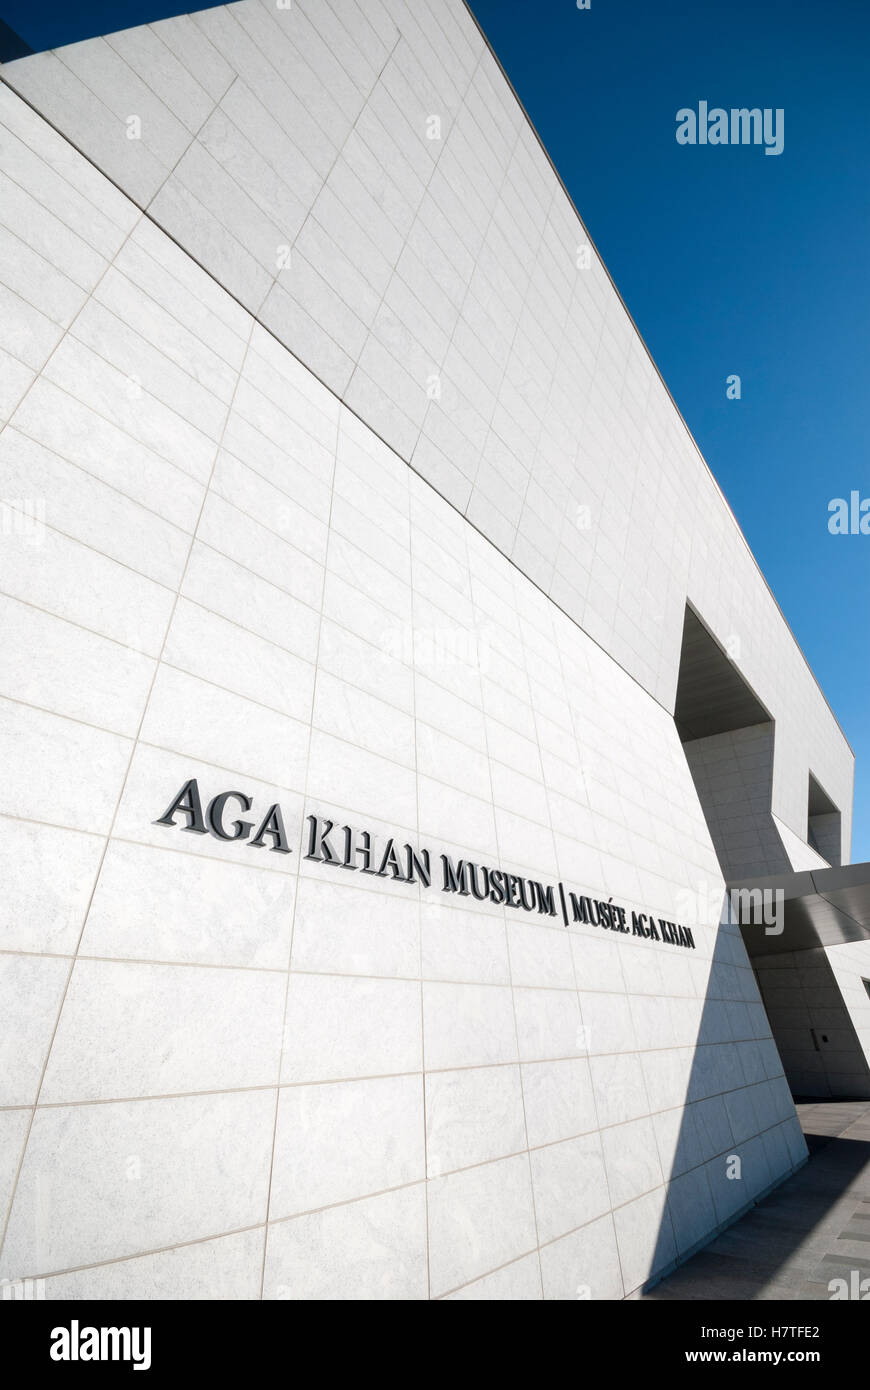 The dramatic modern exterior and entrance of the Aga Khan Museum, a centre for Islamic art, Iranian art and Muslim culture in Toronto, Ontario Canada Stock Photo